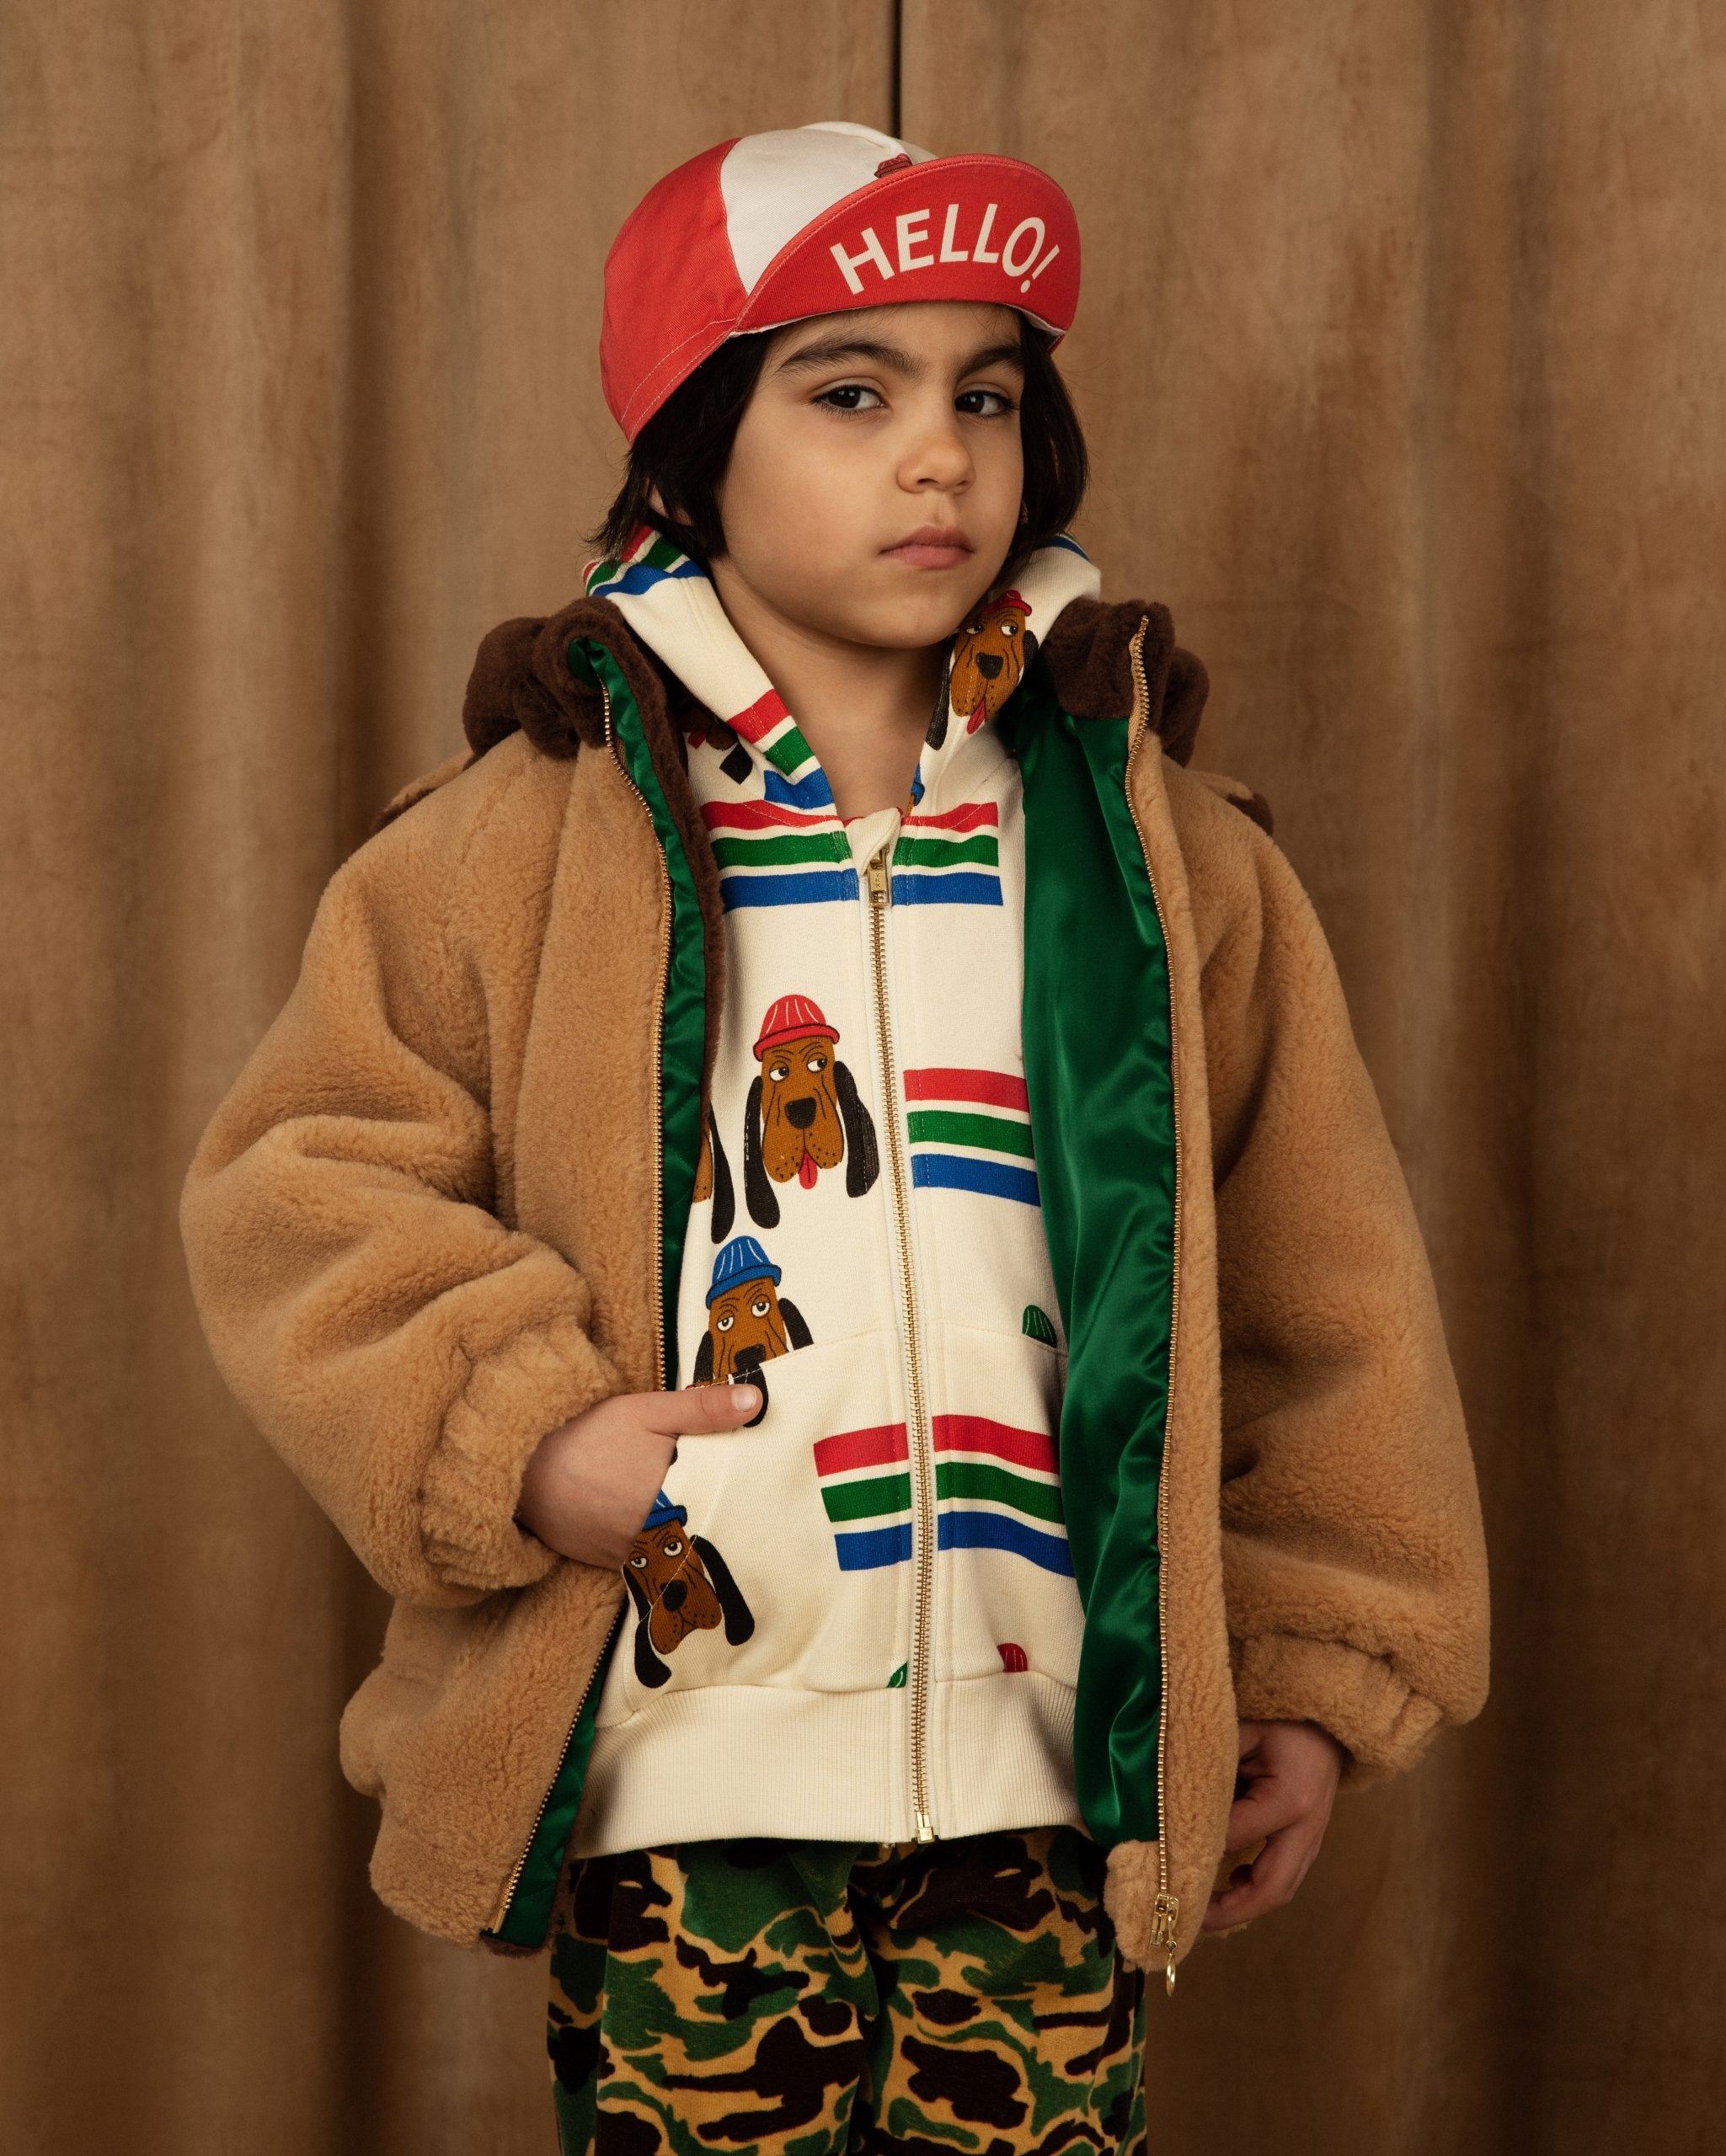 MINI RODINI - BLOODHOUND AOP ZIP HOODIE with dog illustrations, red hat with hello and faux fur jacket